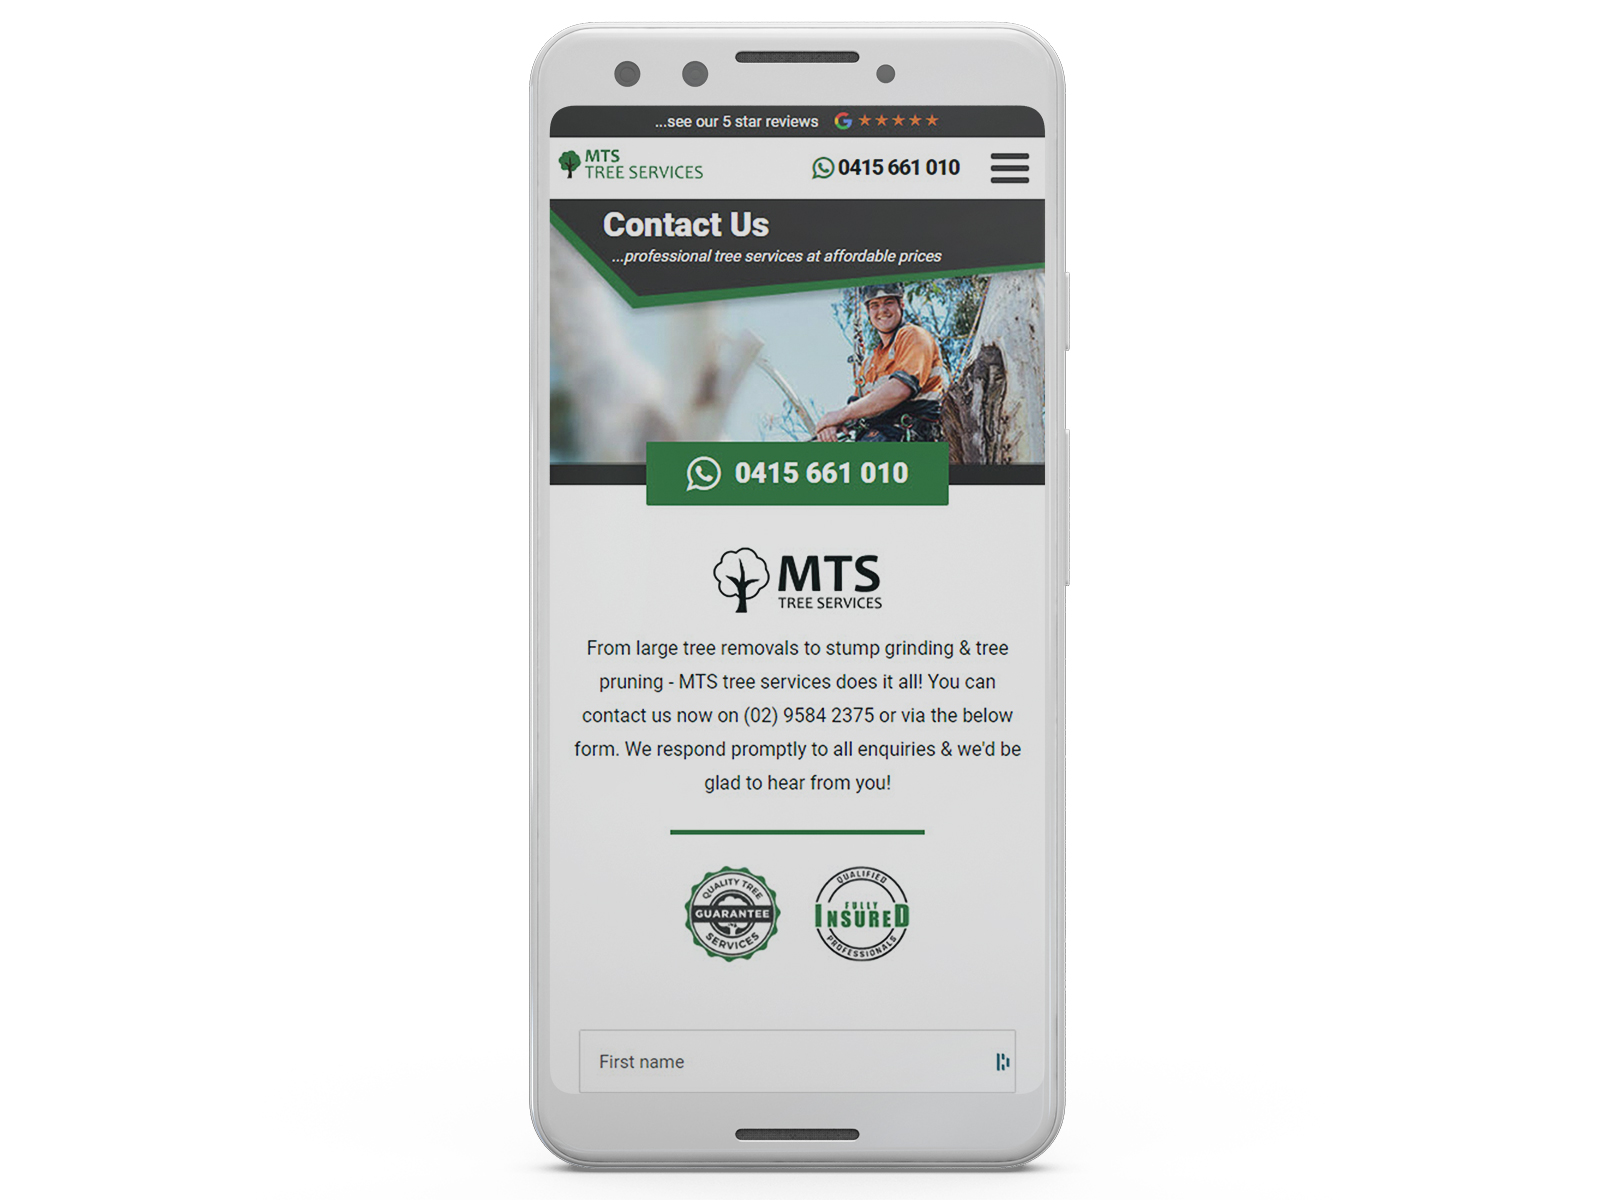 MTS Tree Services Contact Us Page